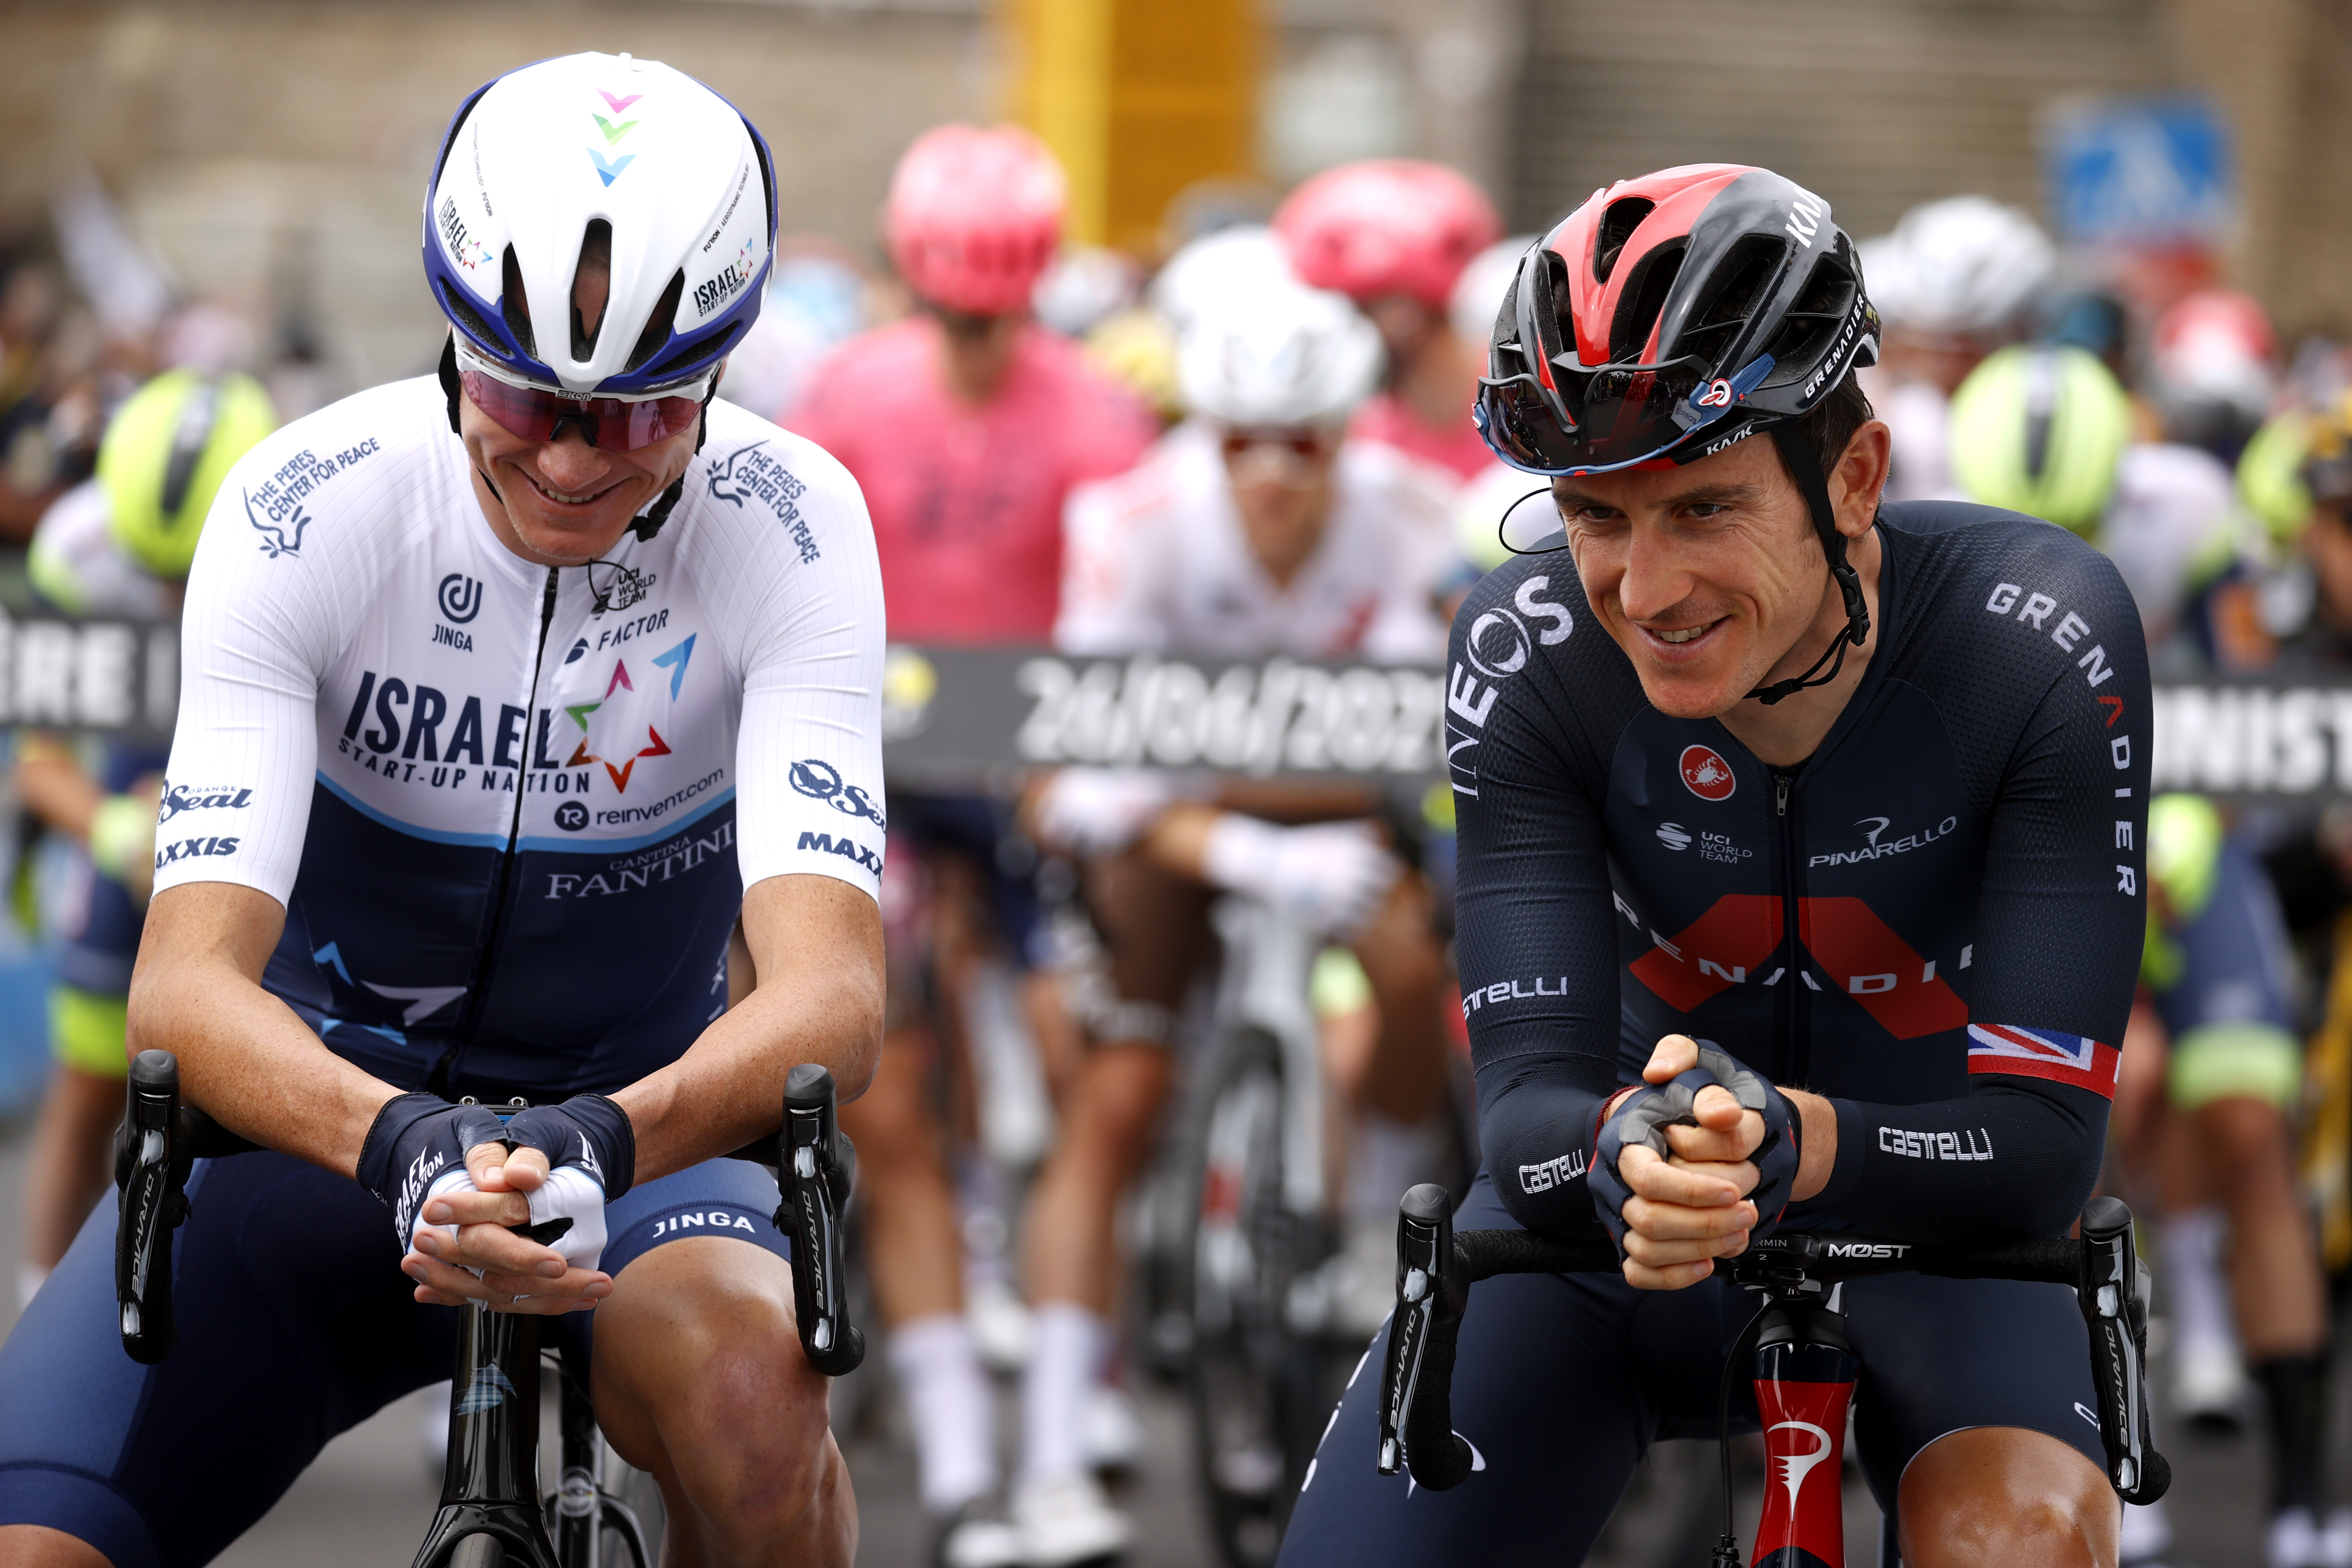 Chris Froome and Geraint Thomas smiling